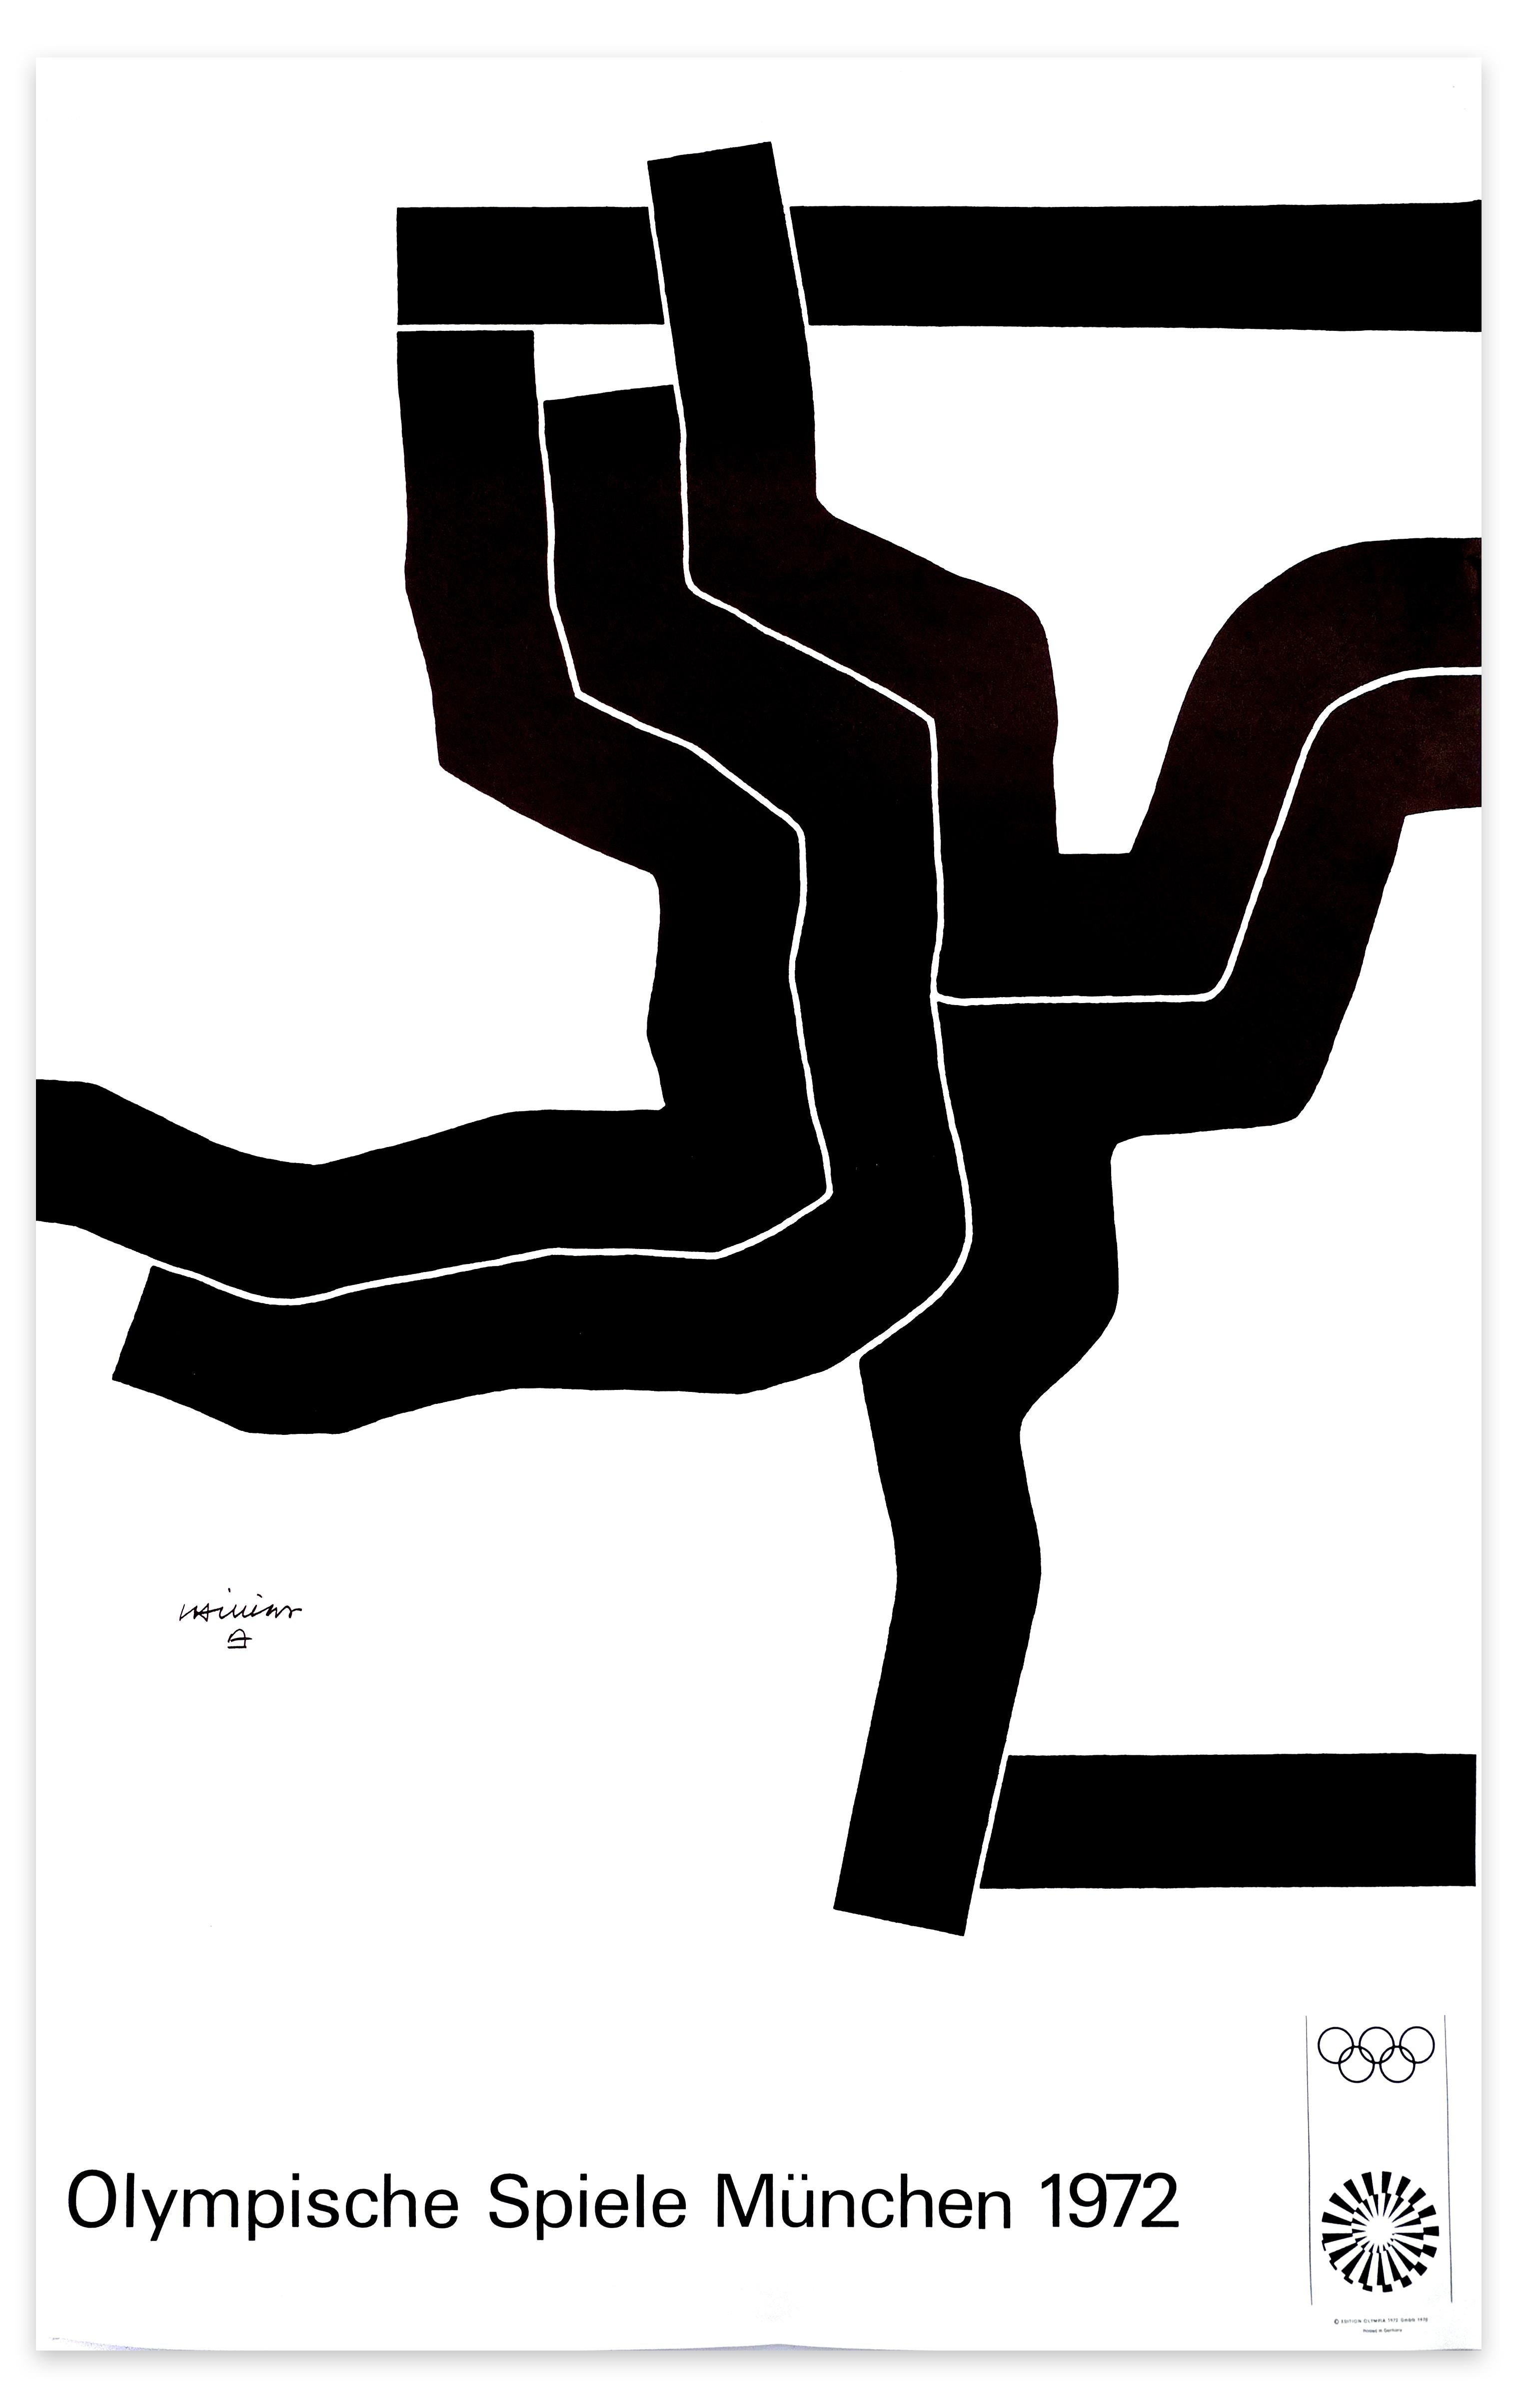 Munich Olympic Games is a beautiful color poster realized by Eduardo Chillida in 1972.

This artwork was realized on the occasion of the Munich Olympic Games held in 1972 as reported on the lower part of the artwork. 

Good conditions except for